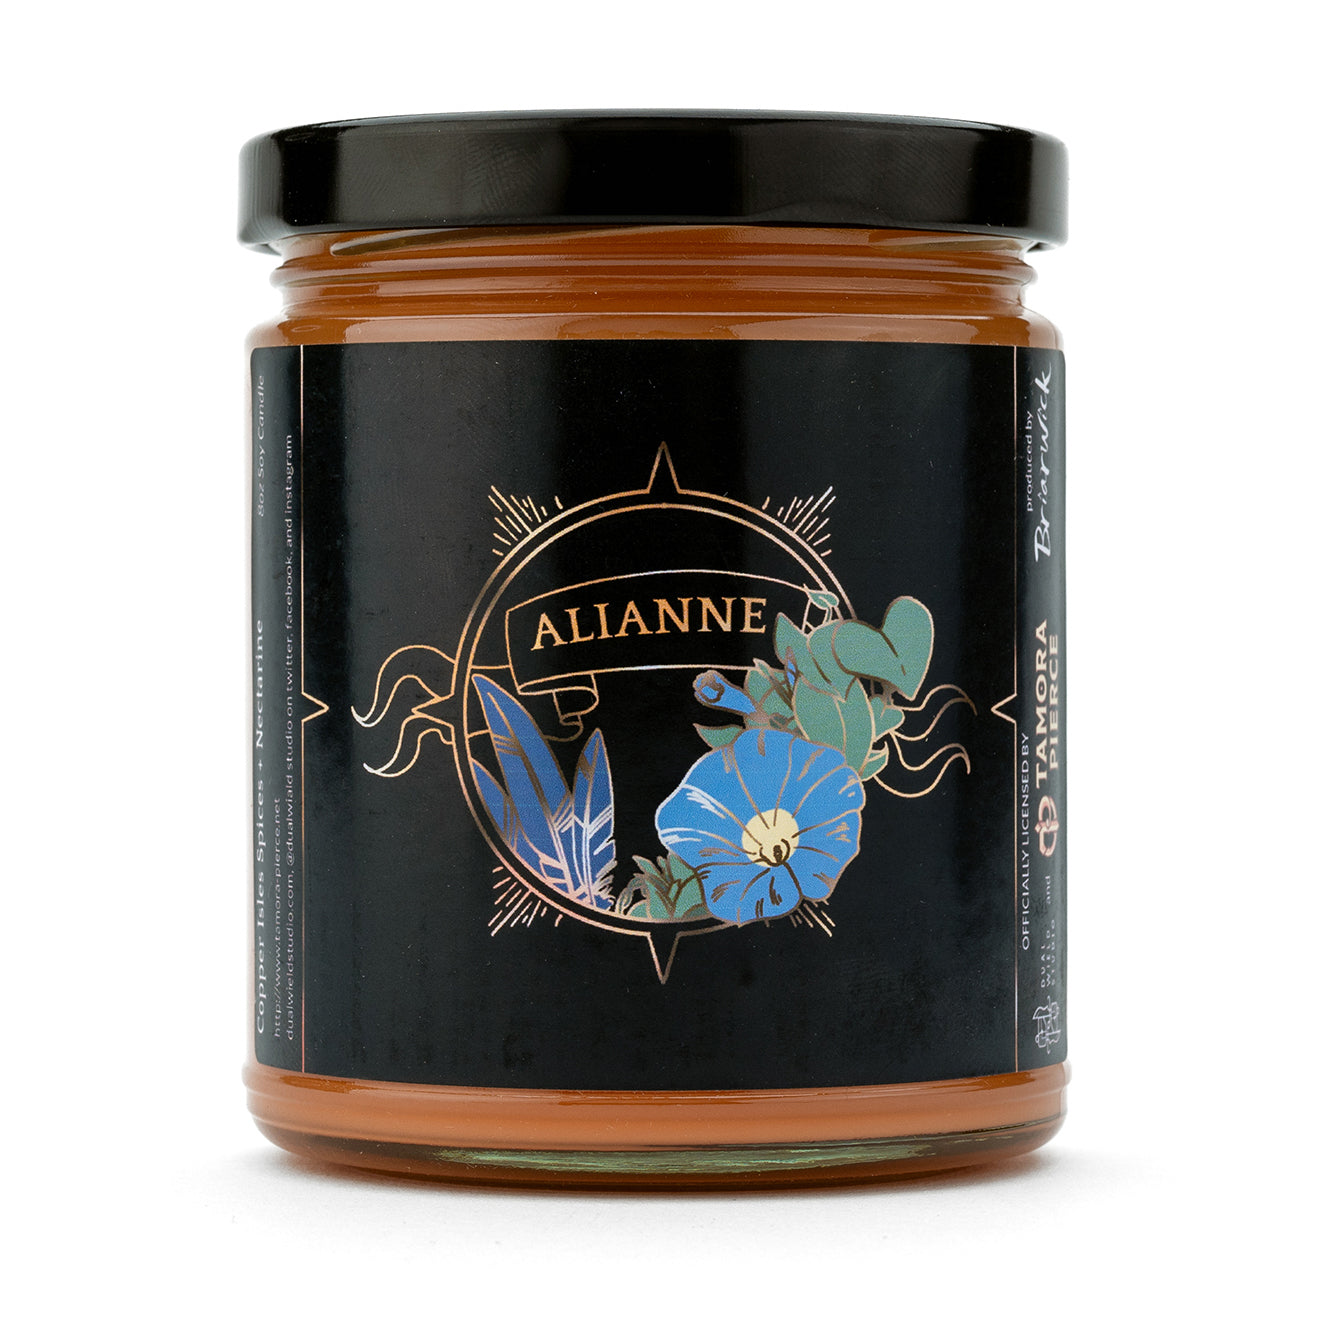 Alianne Candle - Tamora Pierce Officially Licensed - Soy Vegan Candle